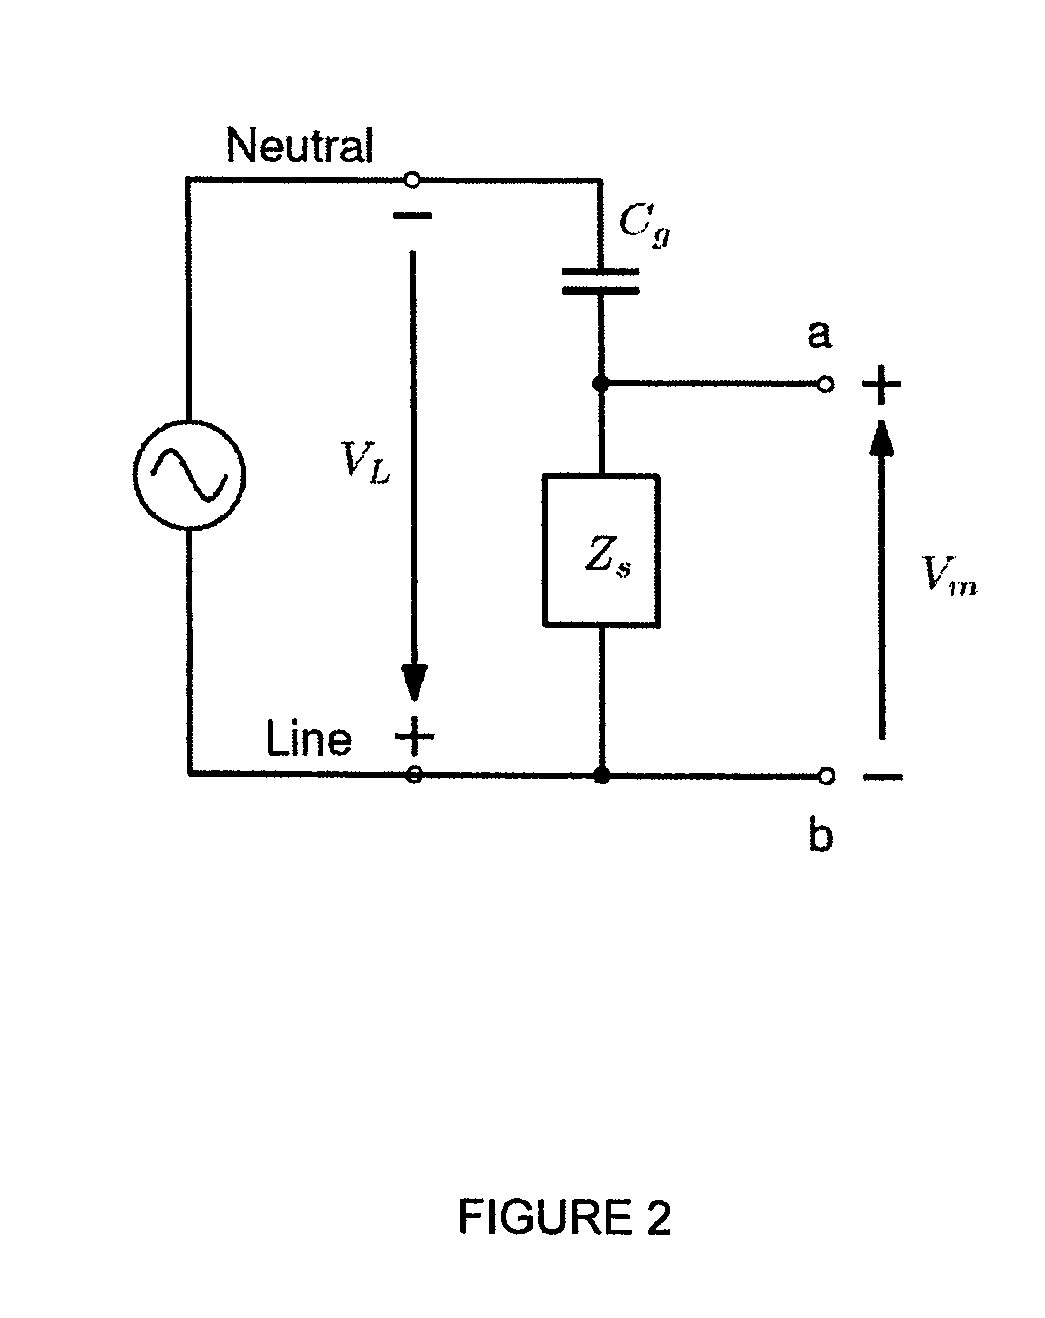 Voltage sensing unit for sensing voltage of high-power lines using a single-contact point and method of use thereof